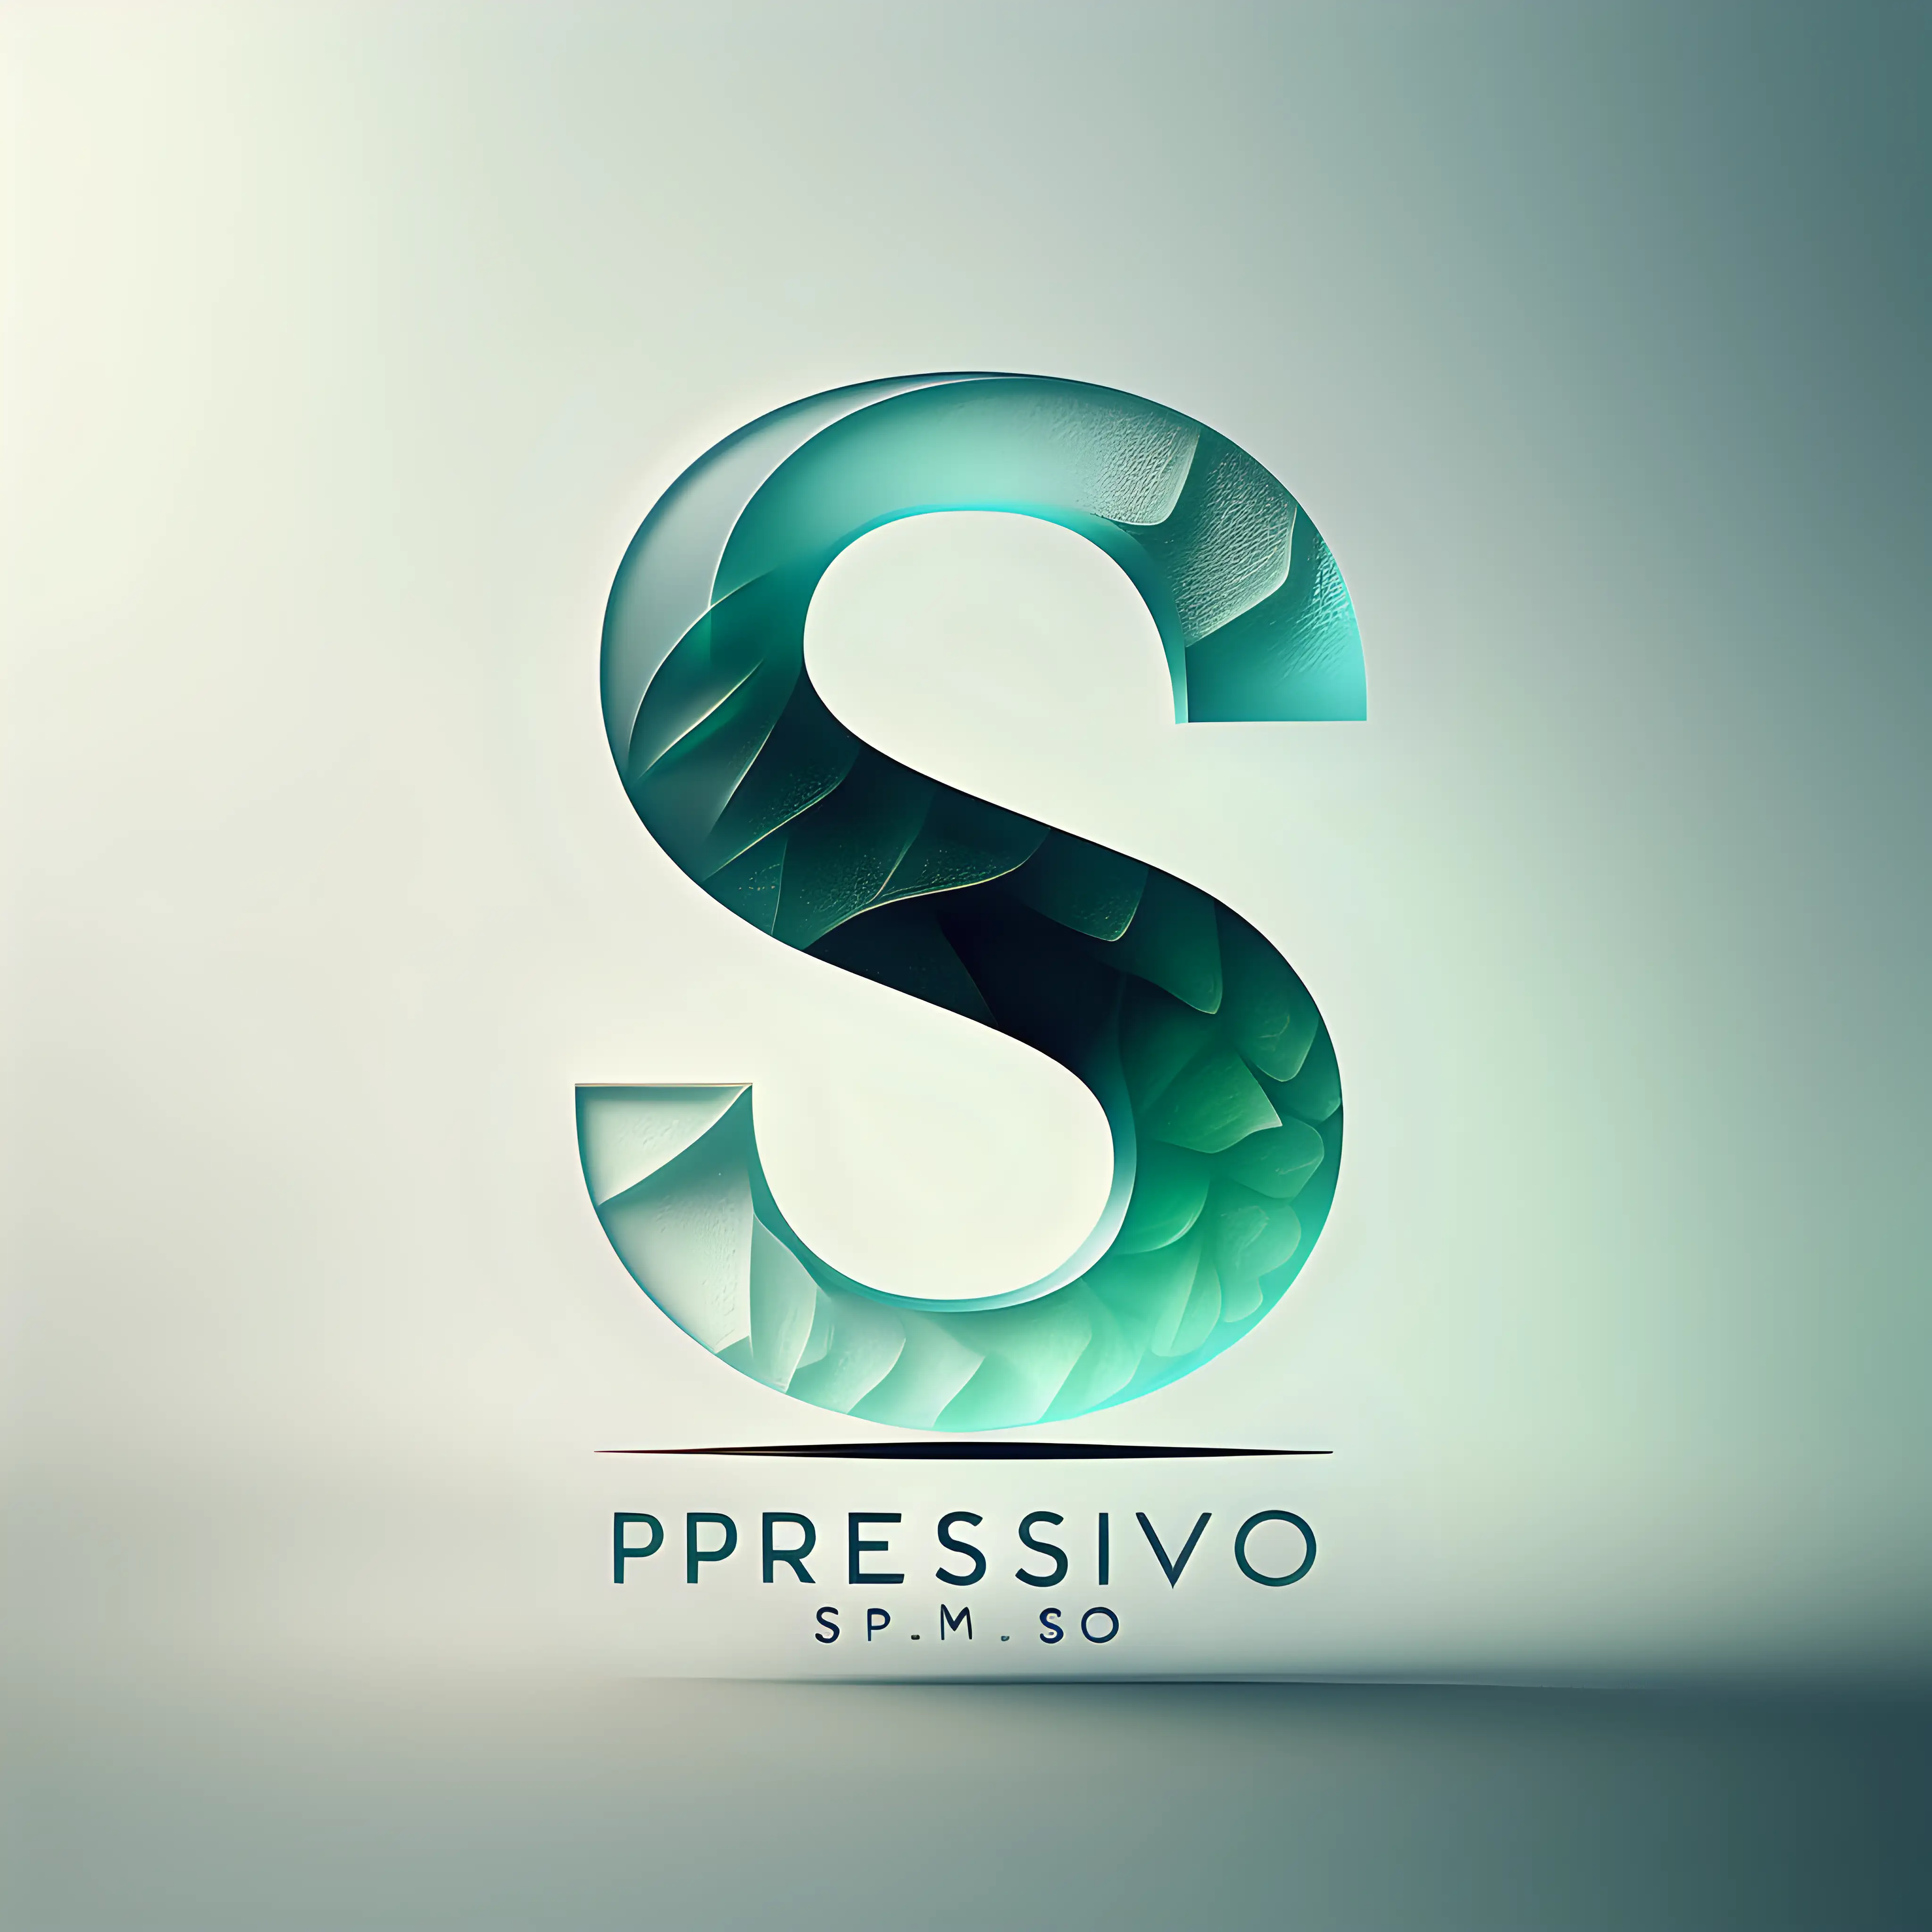 "S" pressivo logo simple and elegant, post-modern conceptual. Also use only ice blue and jade green colors. Make the logo appear translucent and include an organic texture and a dim glow. 